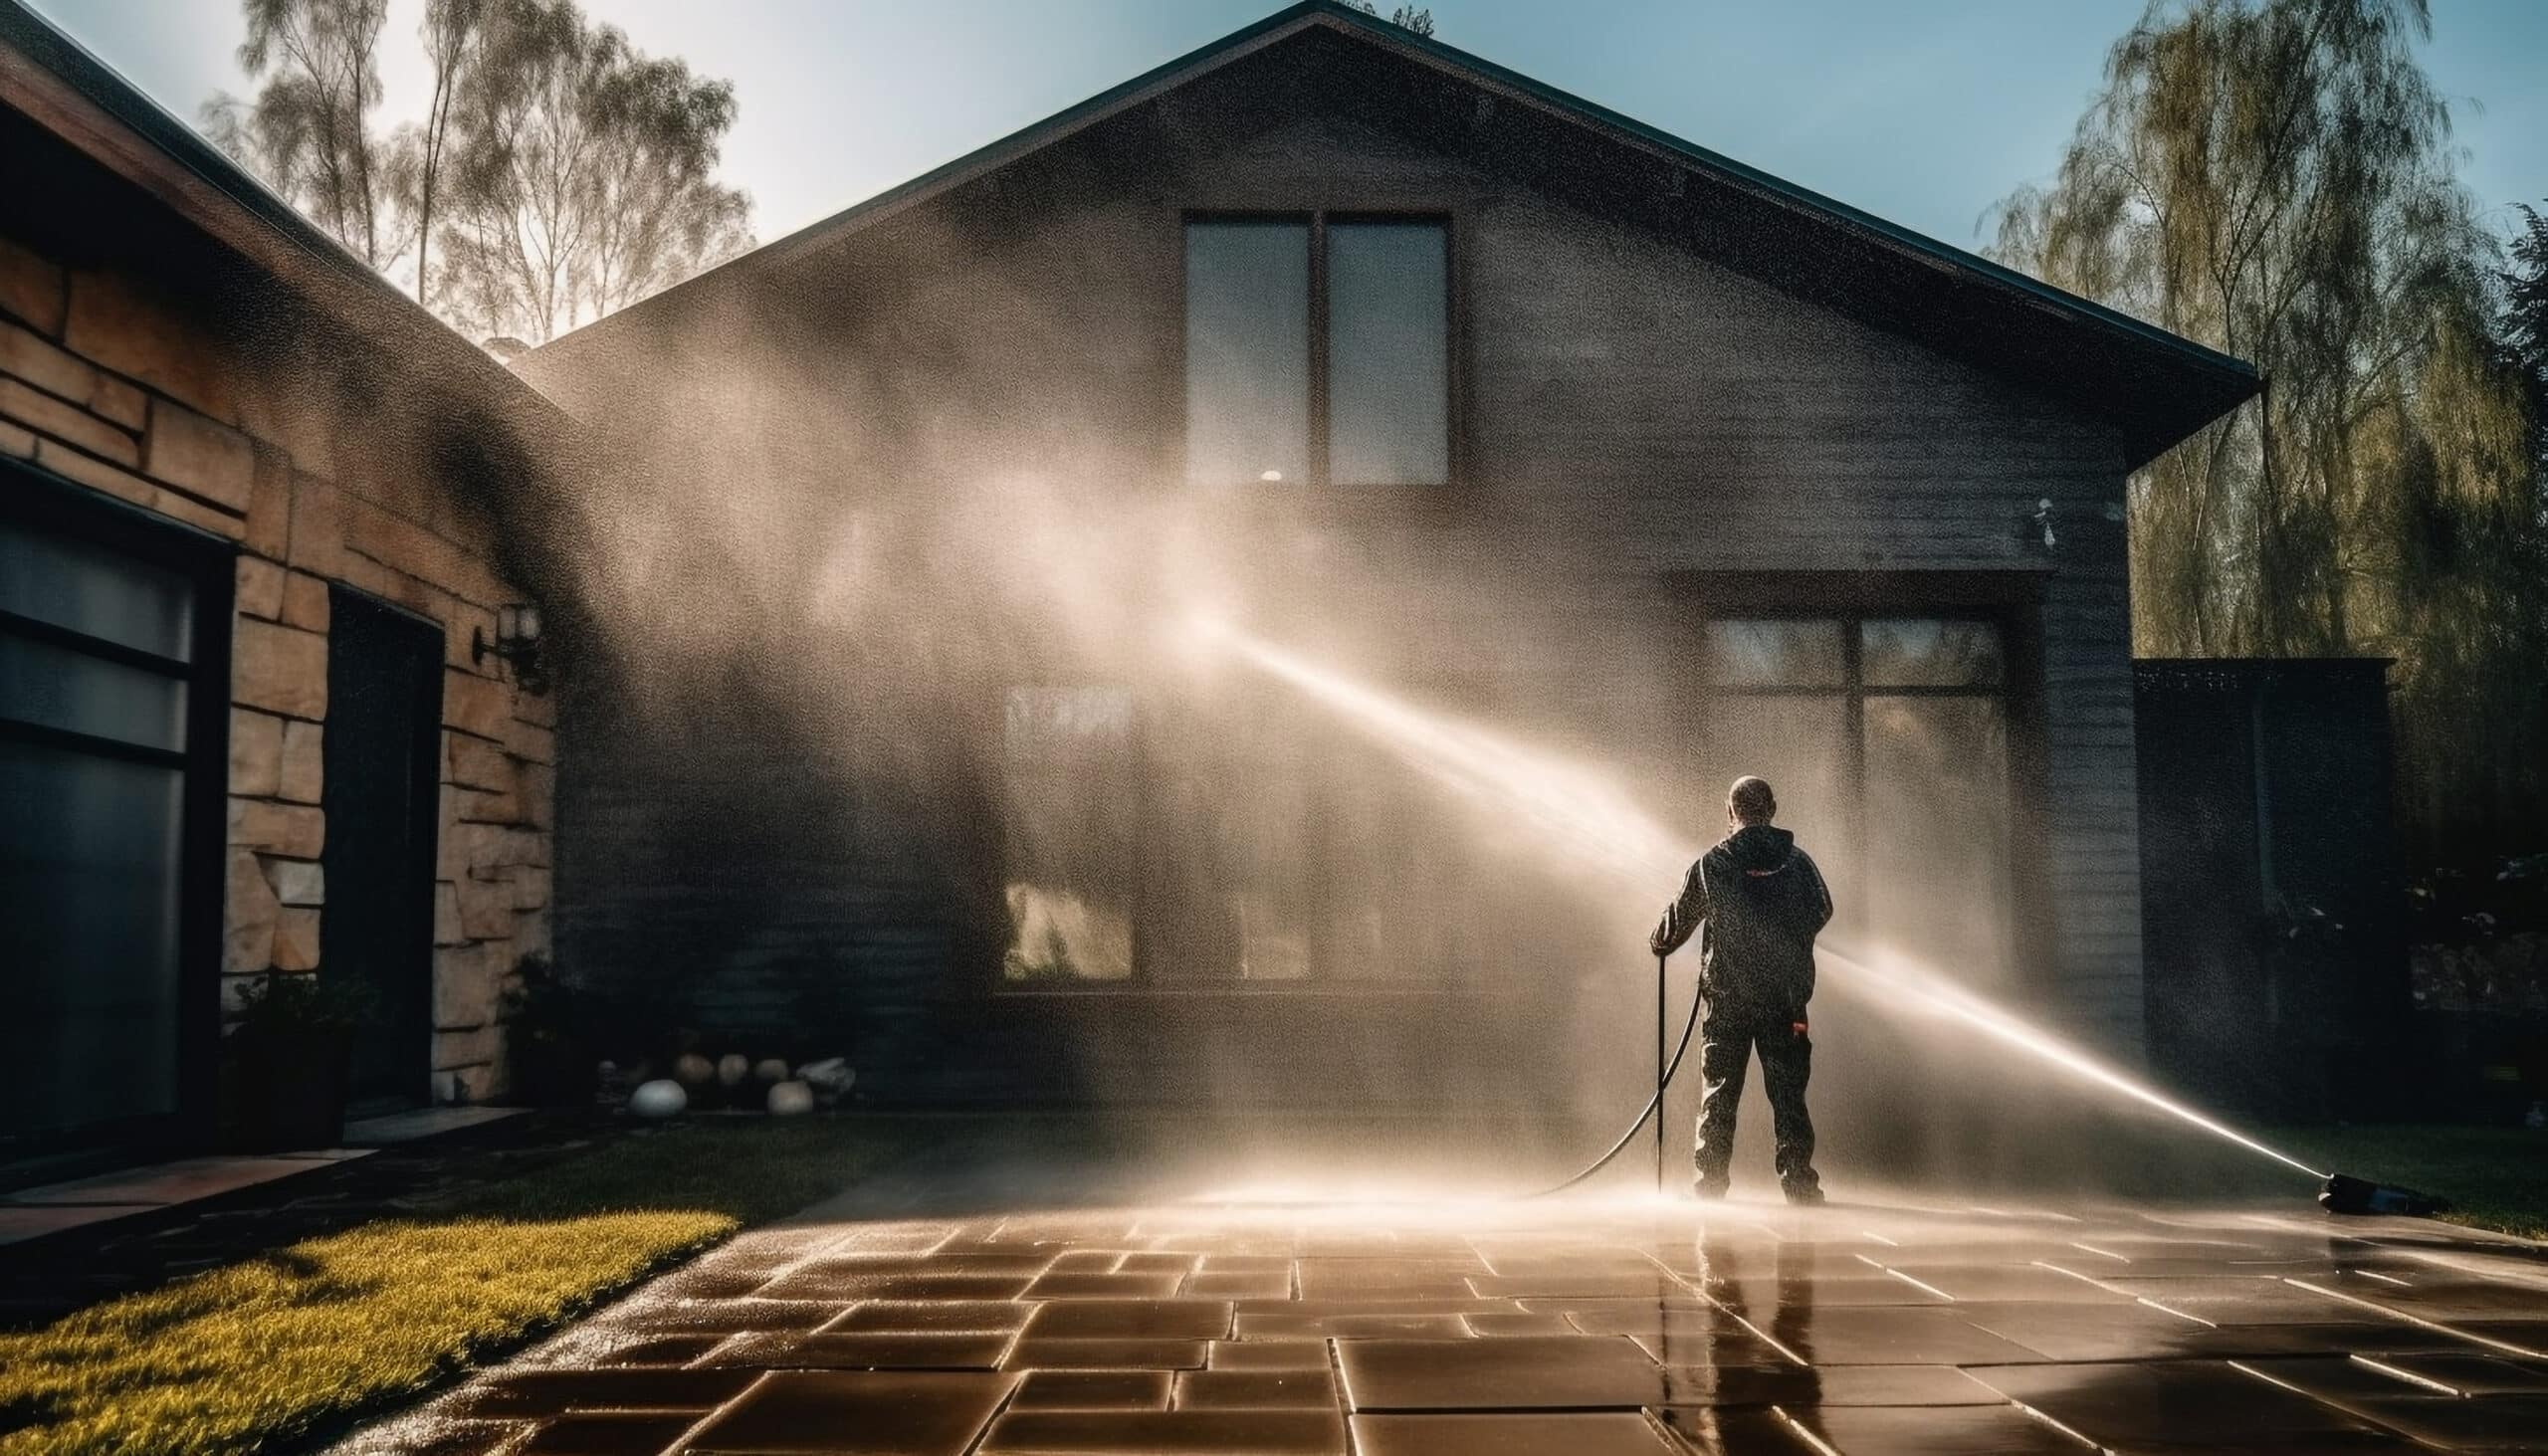 www.appr.com : What is the average lifespan of a gasoline-powered pressure washer?